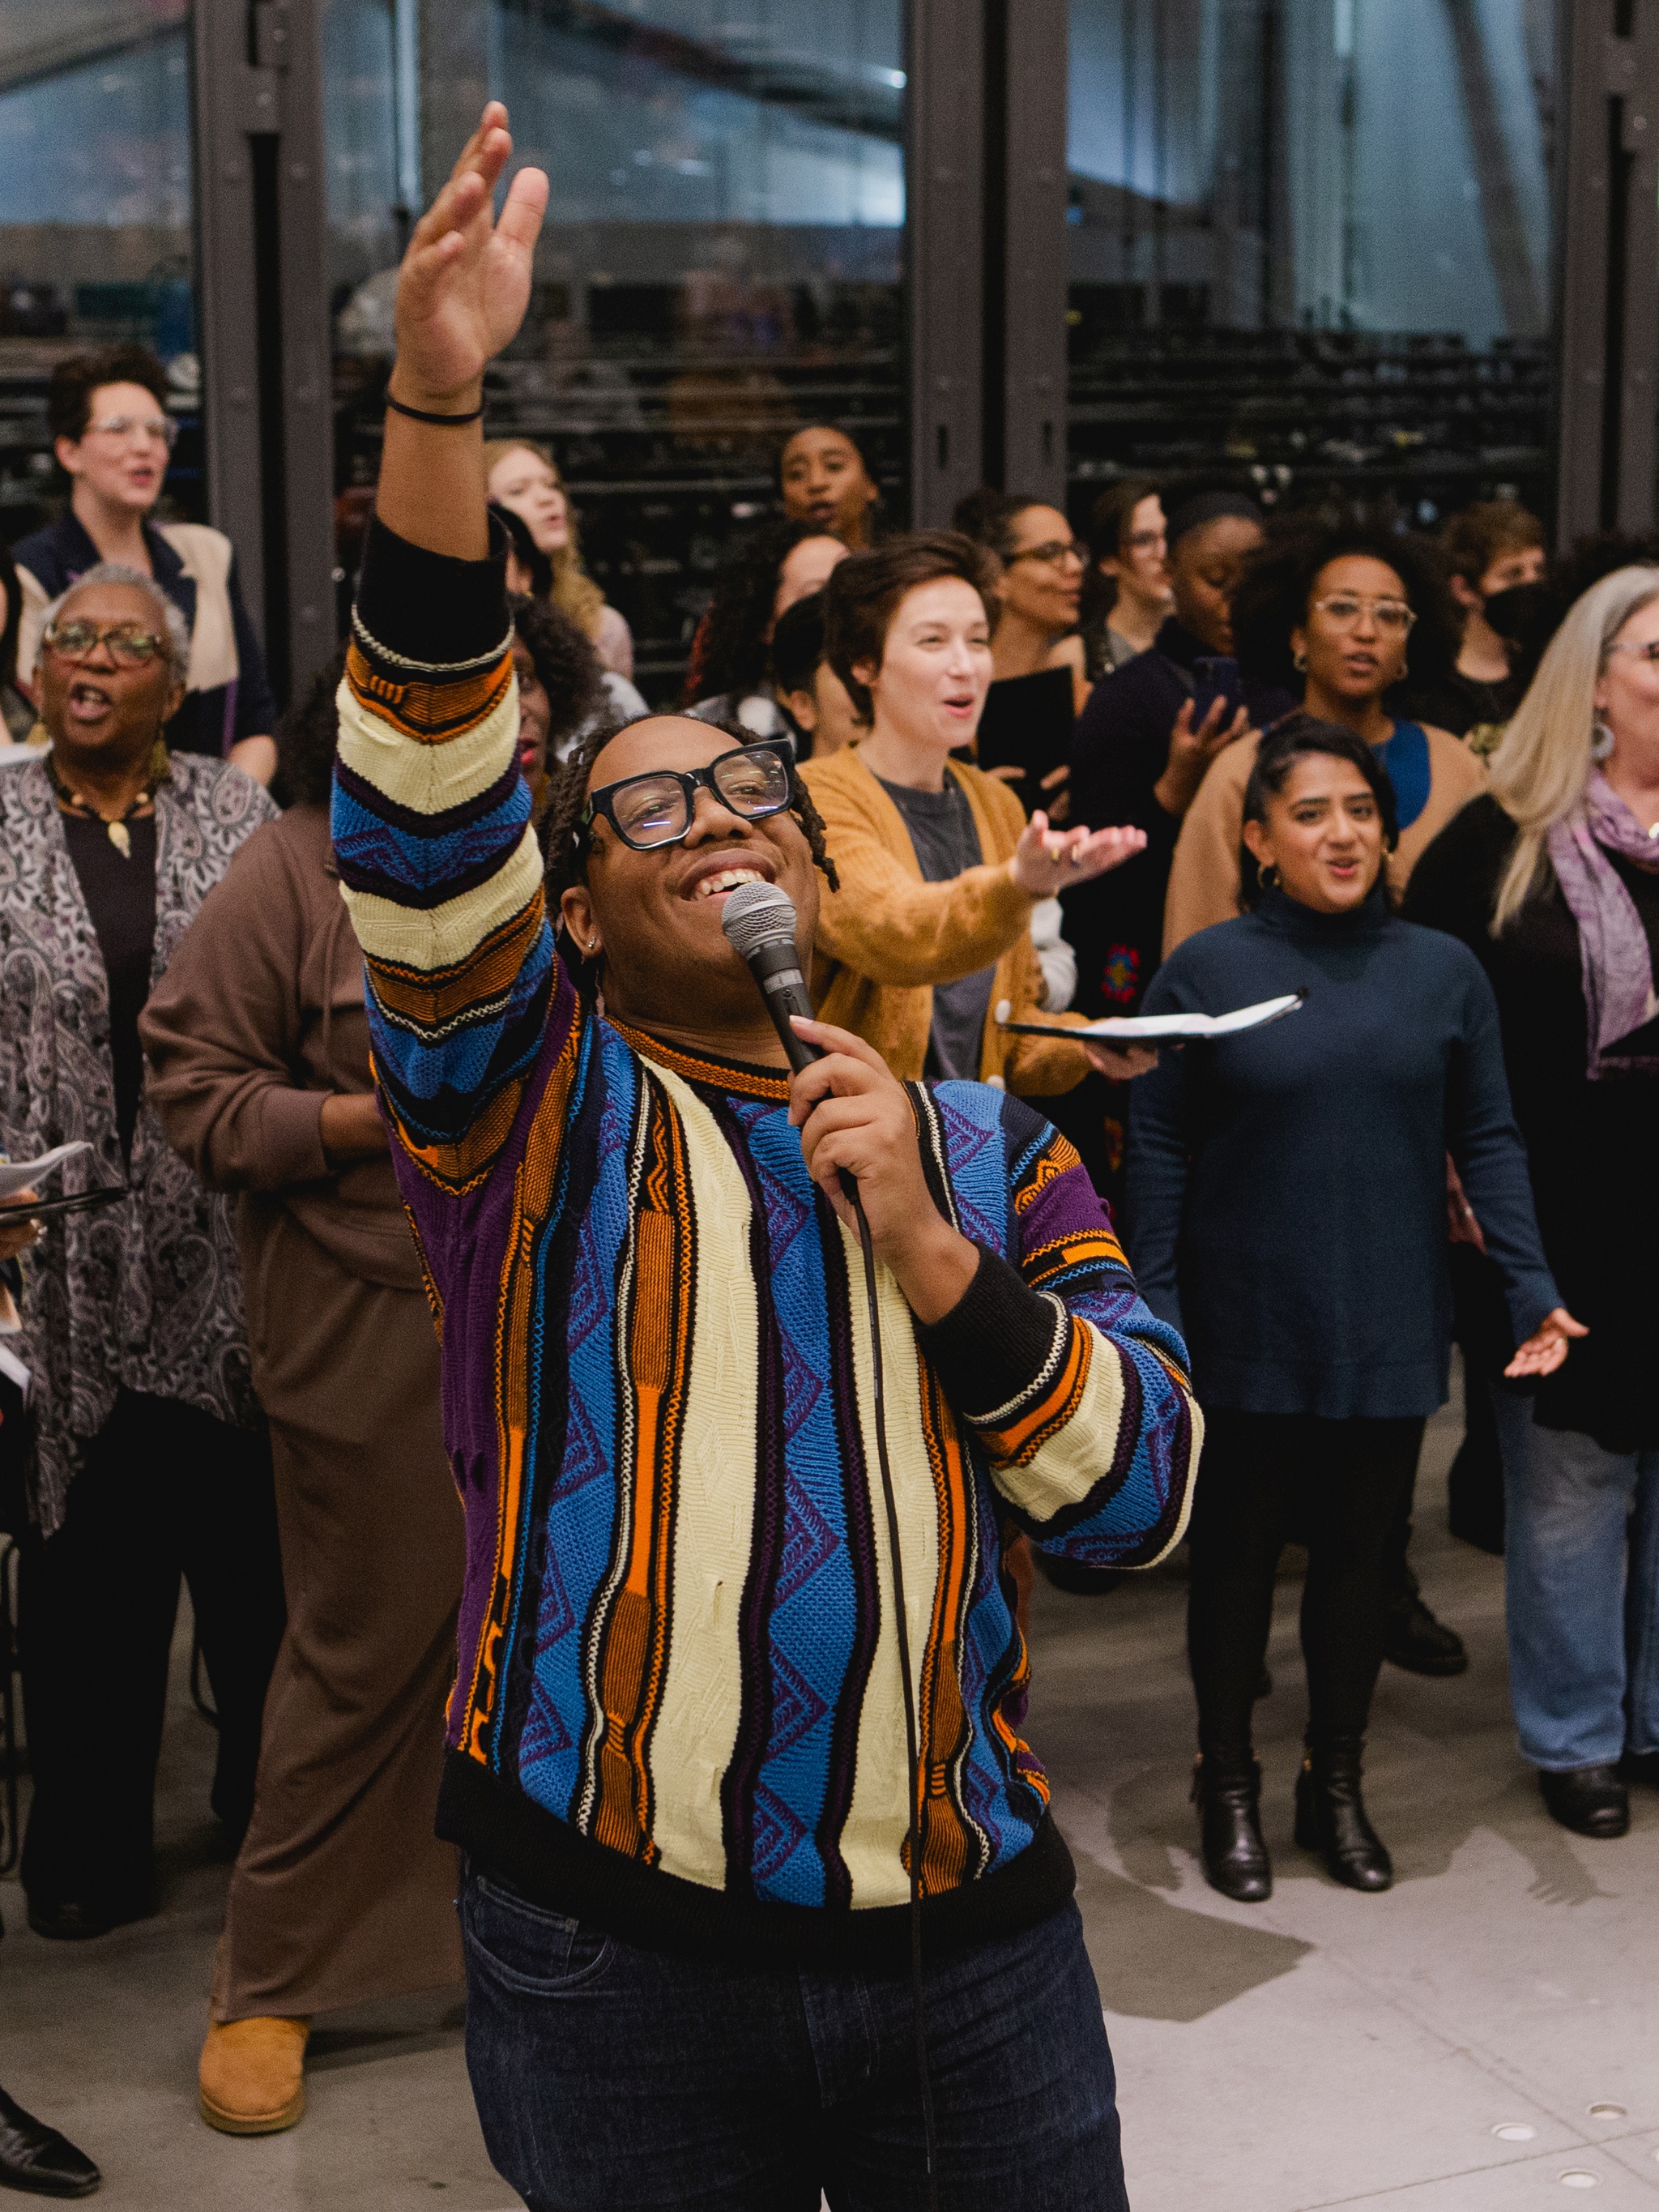 The Fire Ensemble choir rehearses in an event space at The Shed. In front of the choir who is assembled standing in rows, the choir's artistic director Troy Anthony stands holding a microphone reaching his other hand high above his head with a broad smile on his face. 